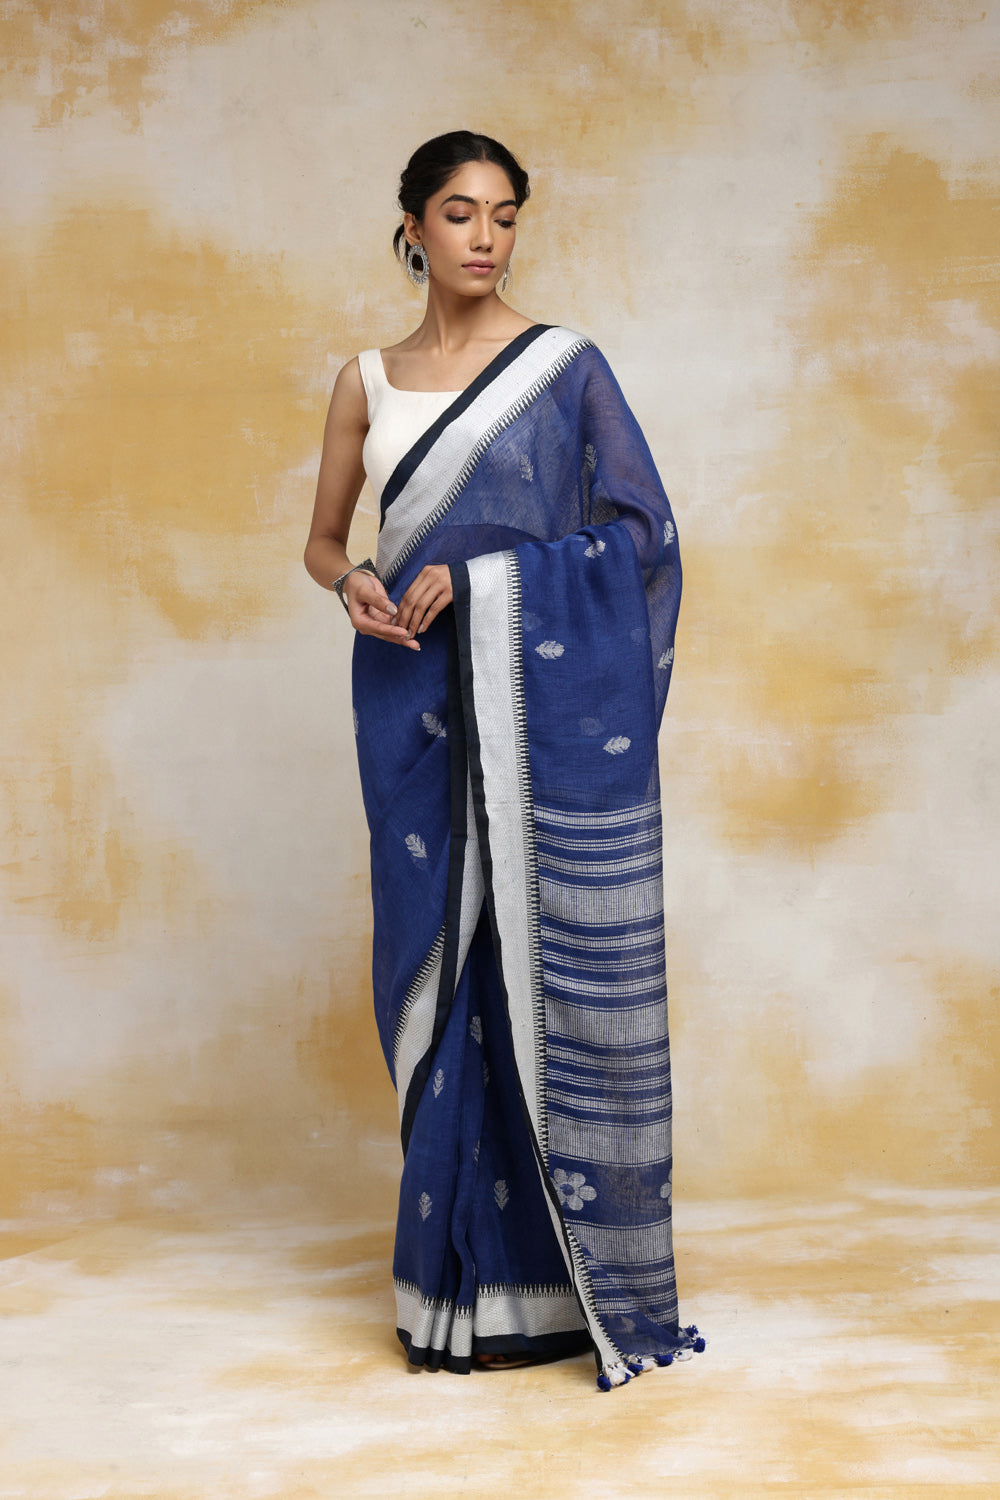 Handloom Navy Blue Linen Saree with White Bootis and Tassels